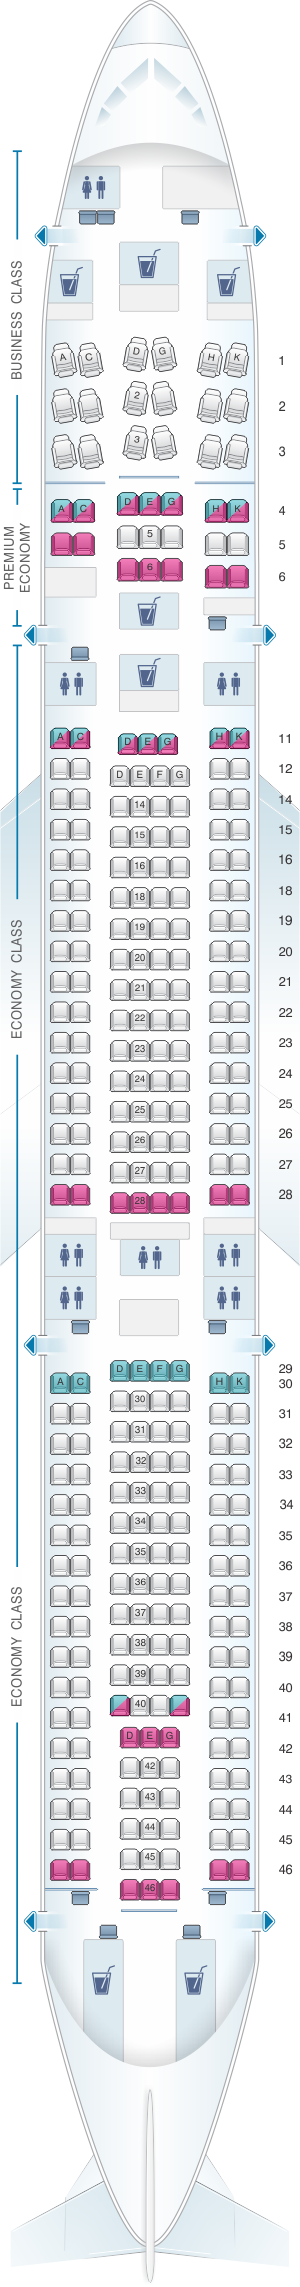 Seat map for Lufthansa Airbus A340 300 298pax